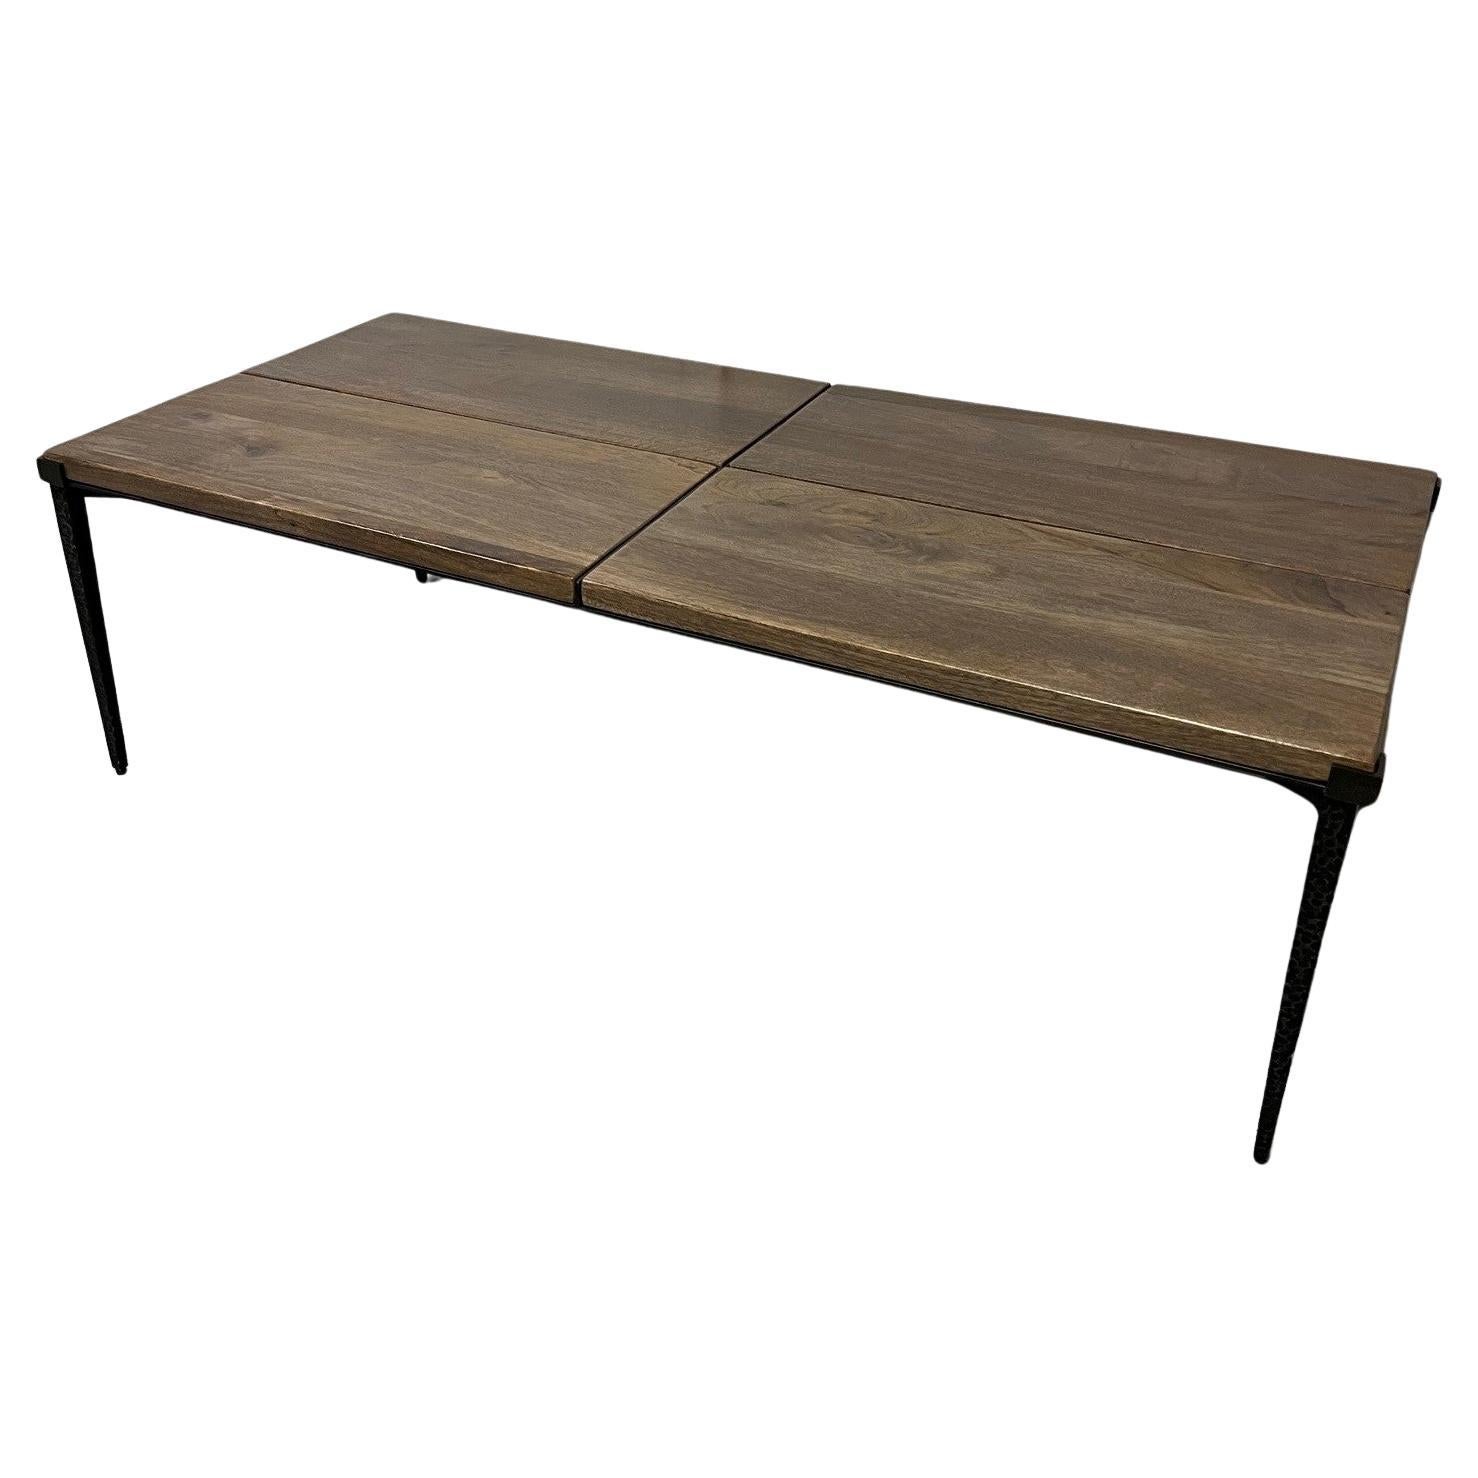 Iron and Wood Coffee Table Imported from India 